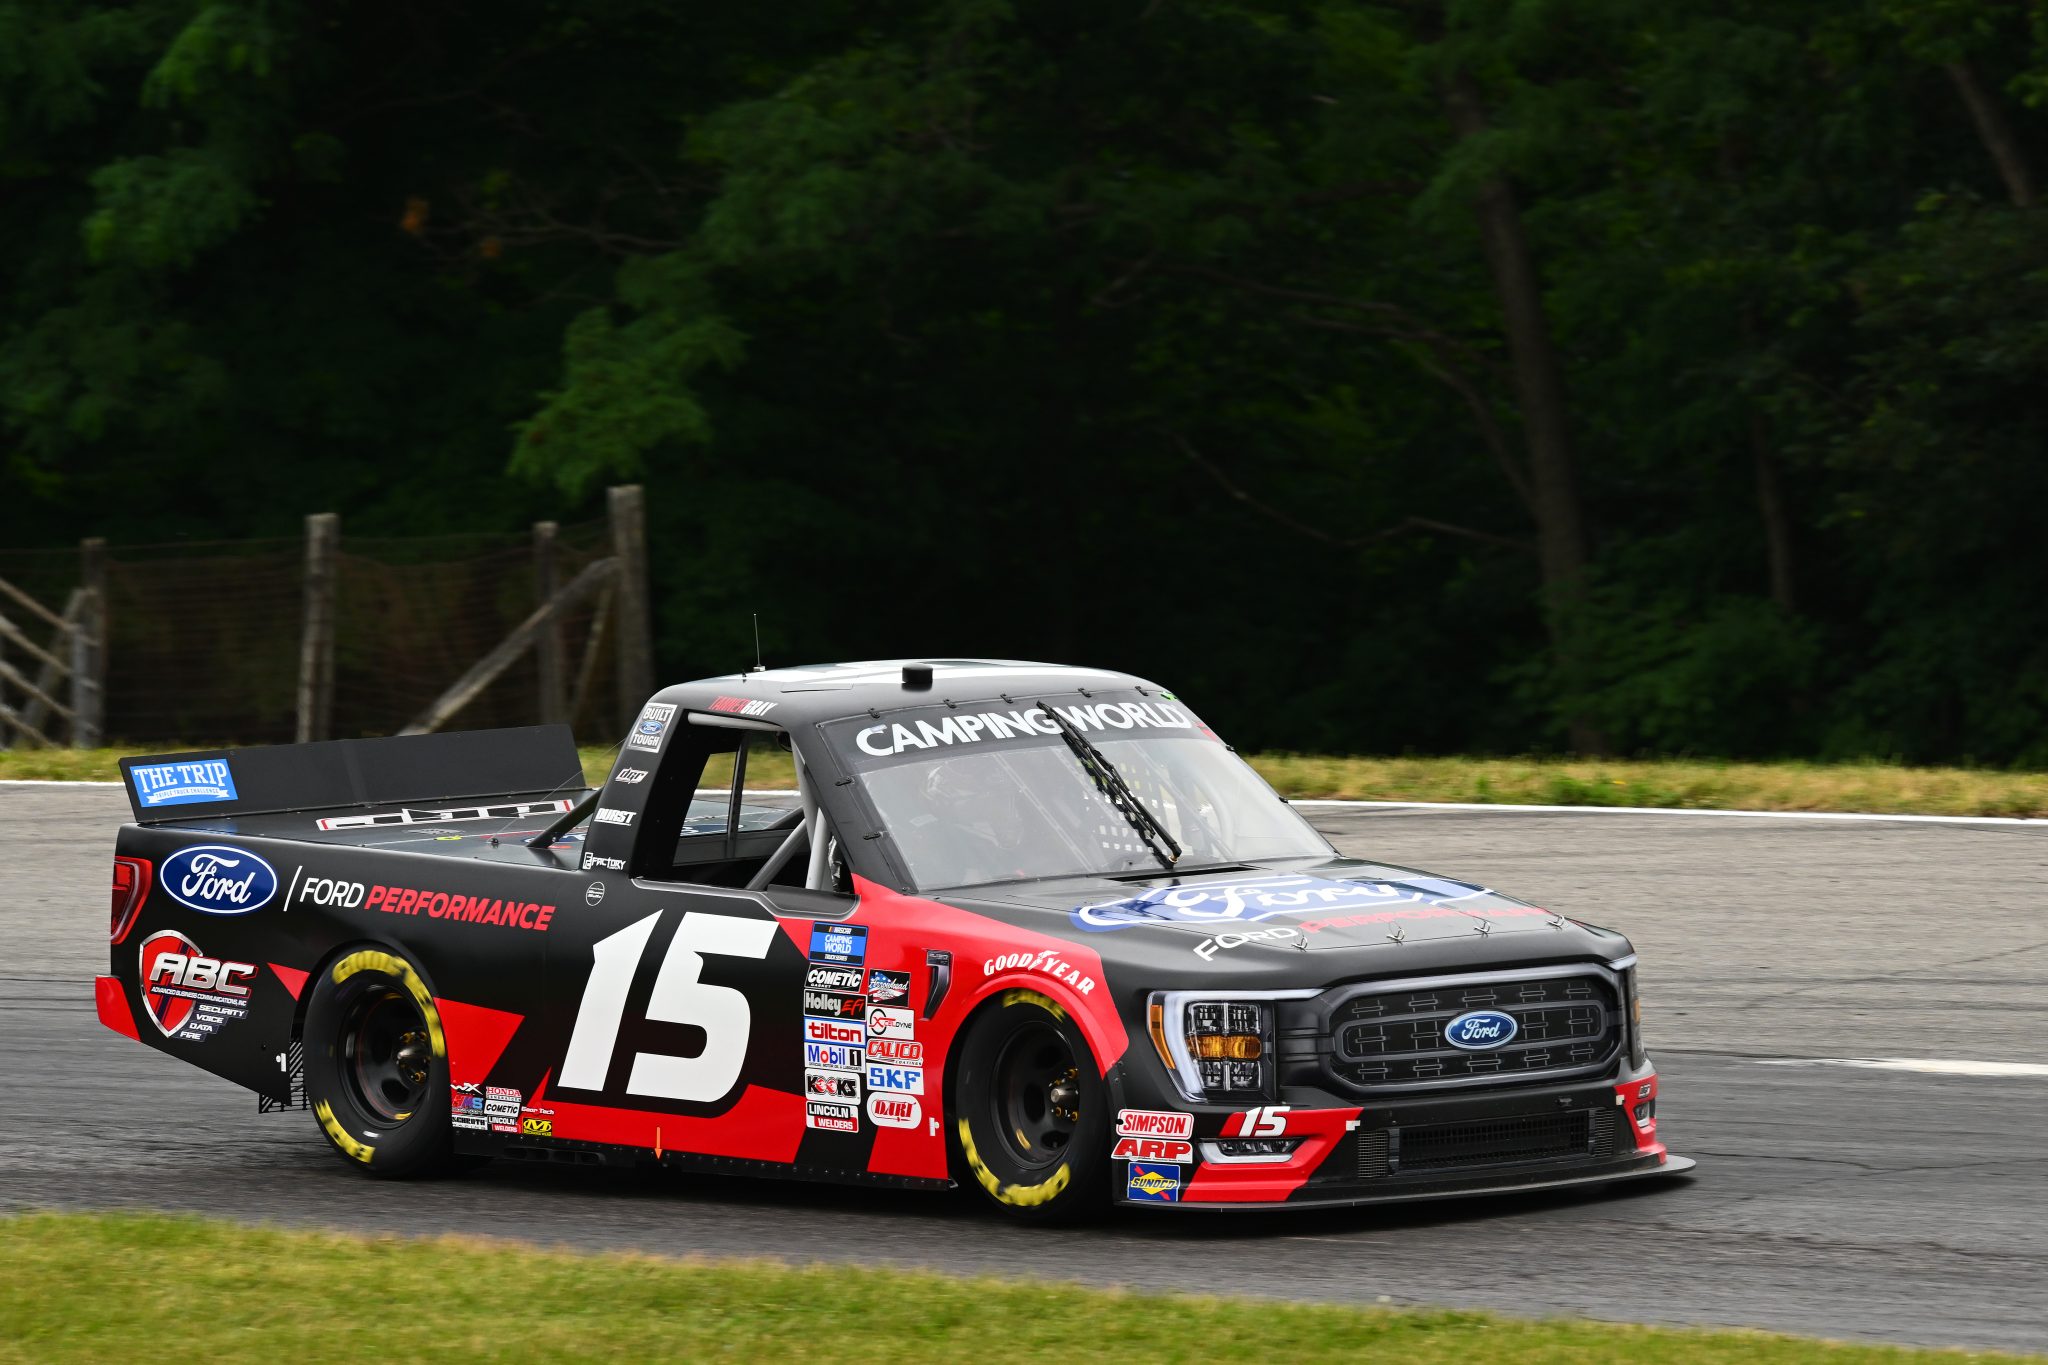 LEXINGTON, OHIO - JULY 08: Tanner Gray, driver of the #15 Ford Performance/ABC Ford, drives during practice for the NASCAR Camping World Truck Series O'Reilly Auto Parts 150 at Mid-Ohio Sports Car Course on July 08, 2022 in Lexington, Ohio. (Photo by Ben Jackson/Getty Images) | Getty Images